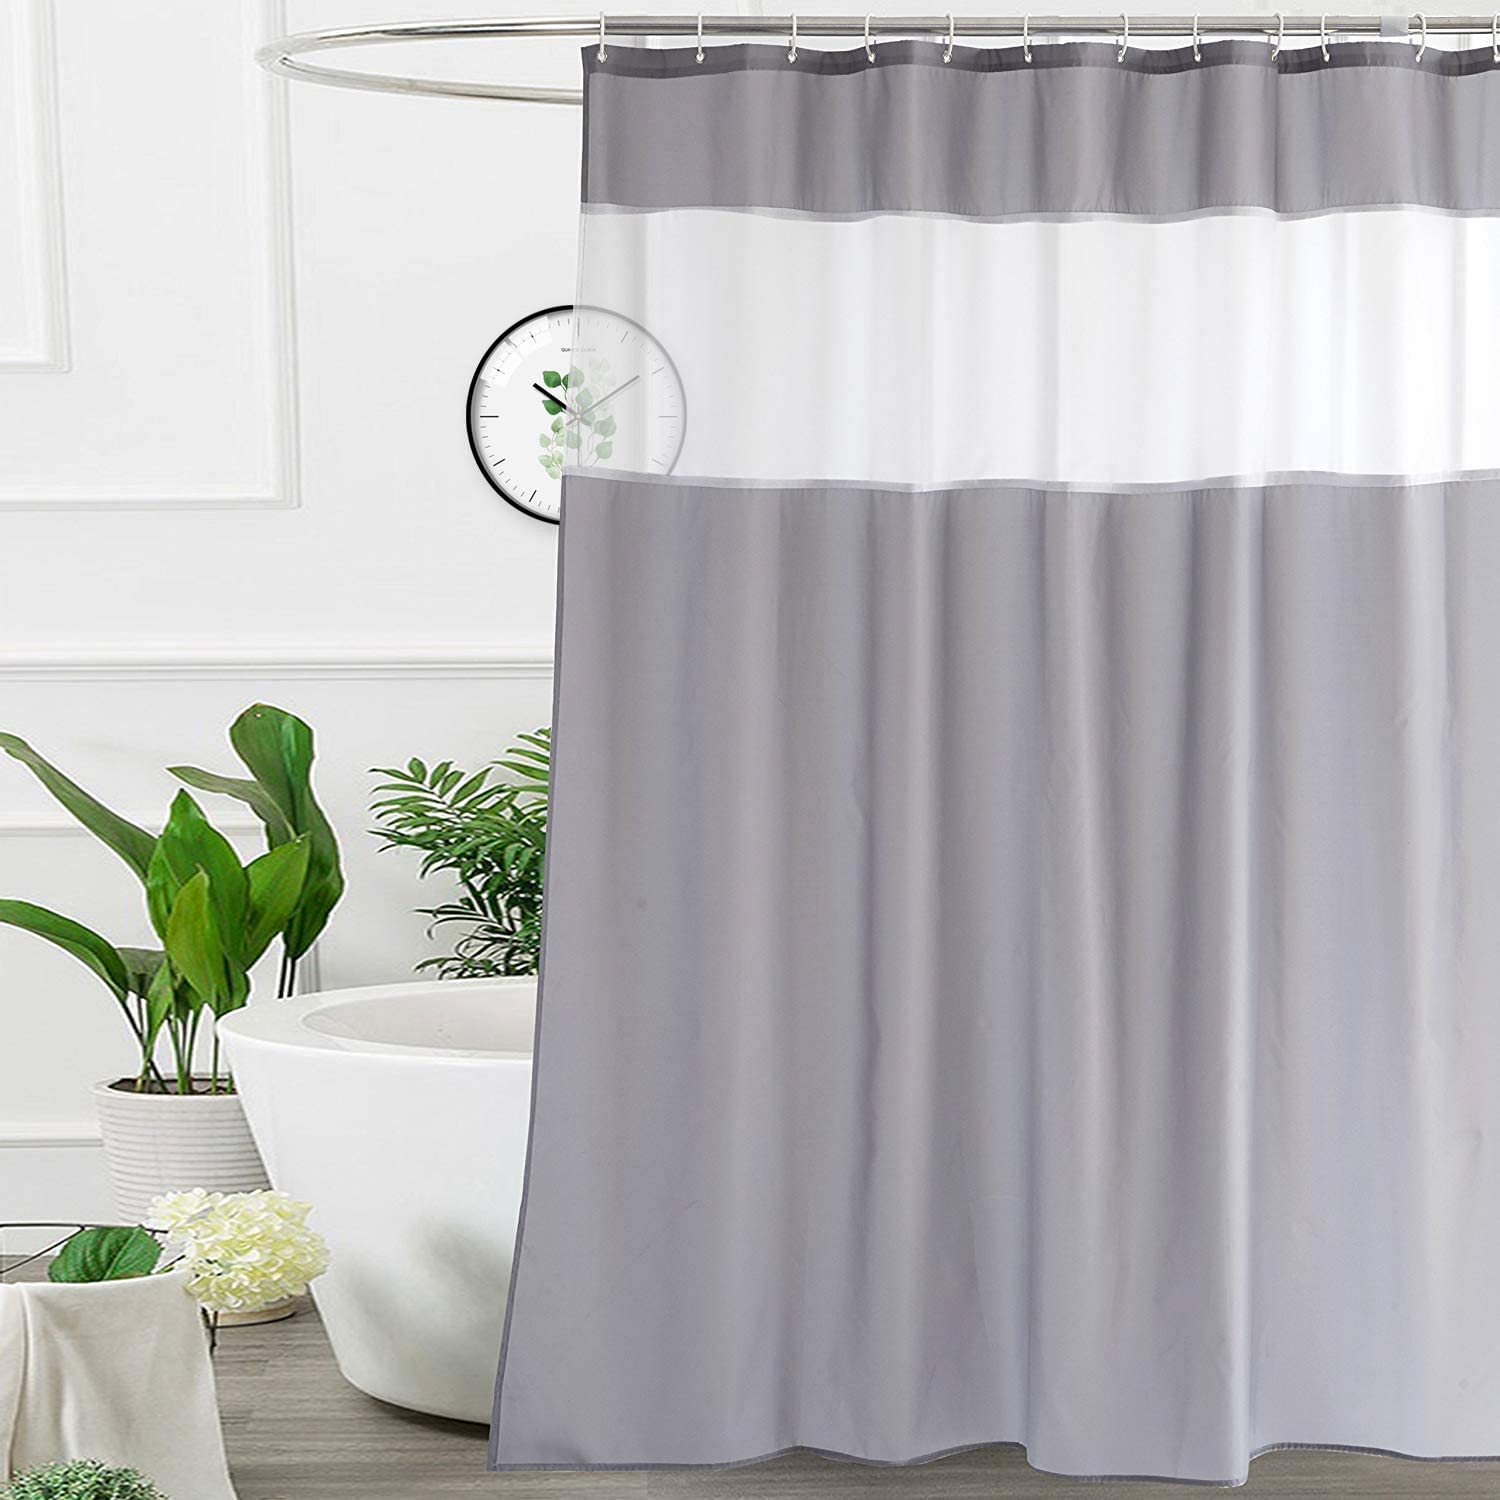 Ufriday 36x72 Inch Stall Size Shower, What Are The Dimensions Of A Stall Shower Curtain